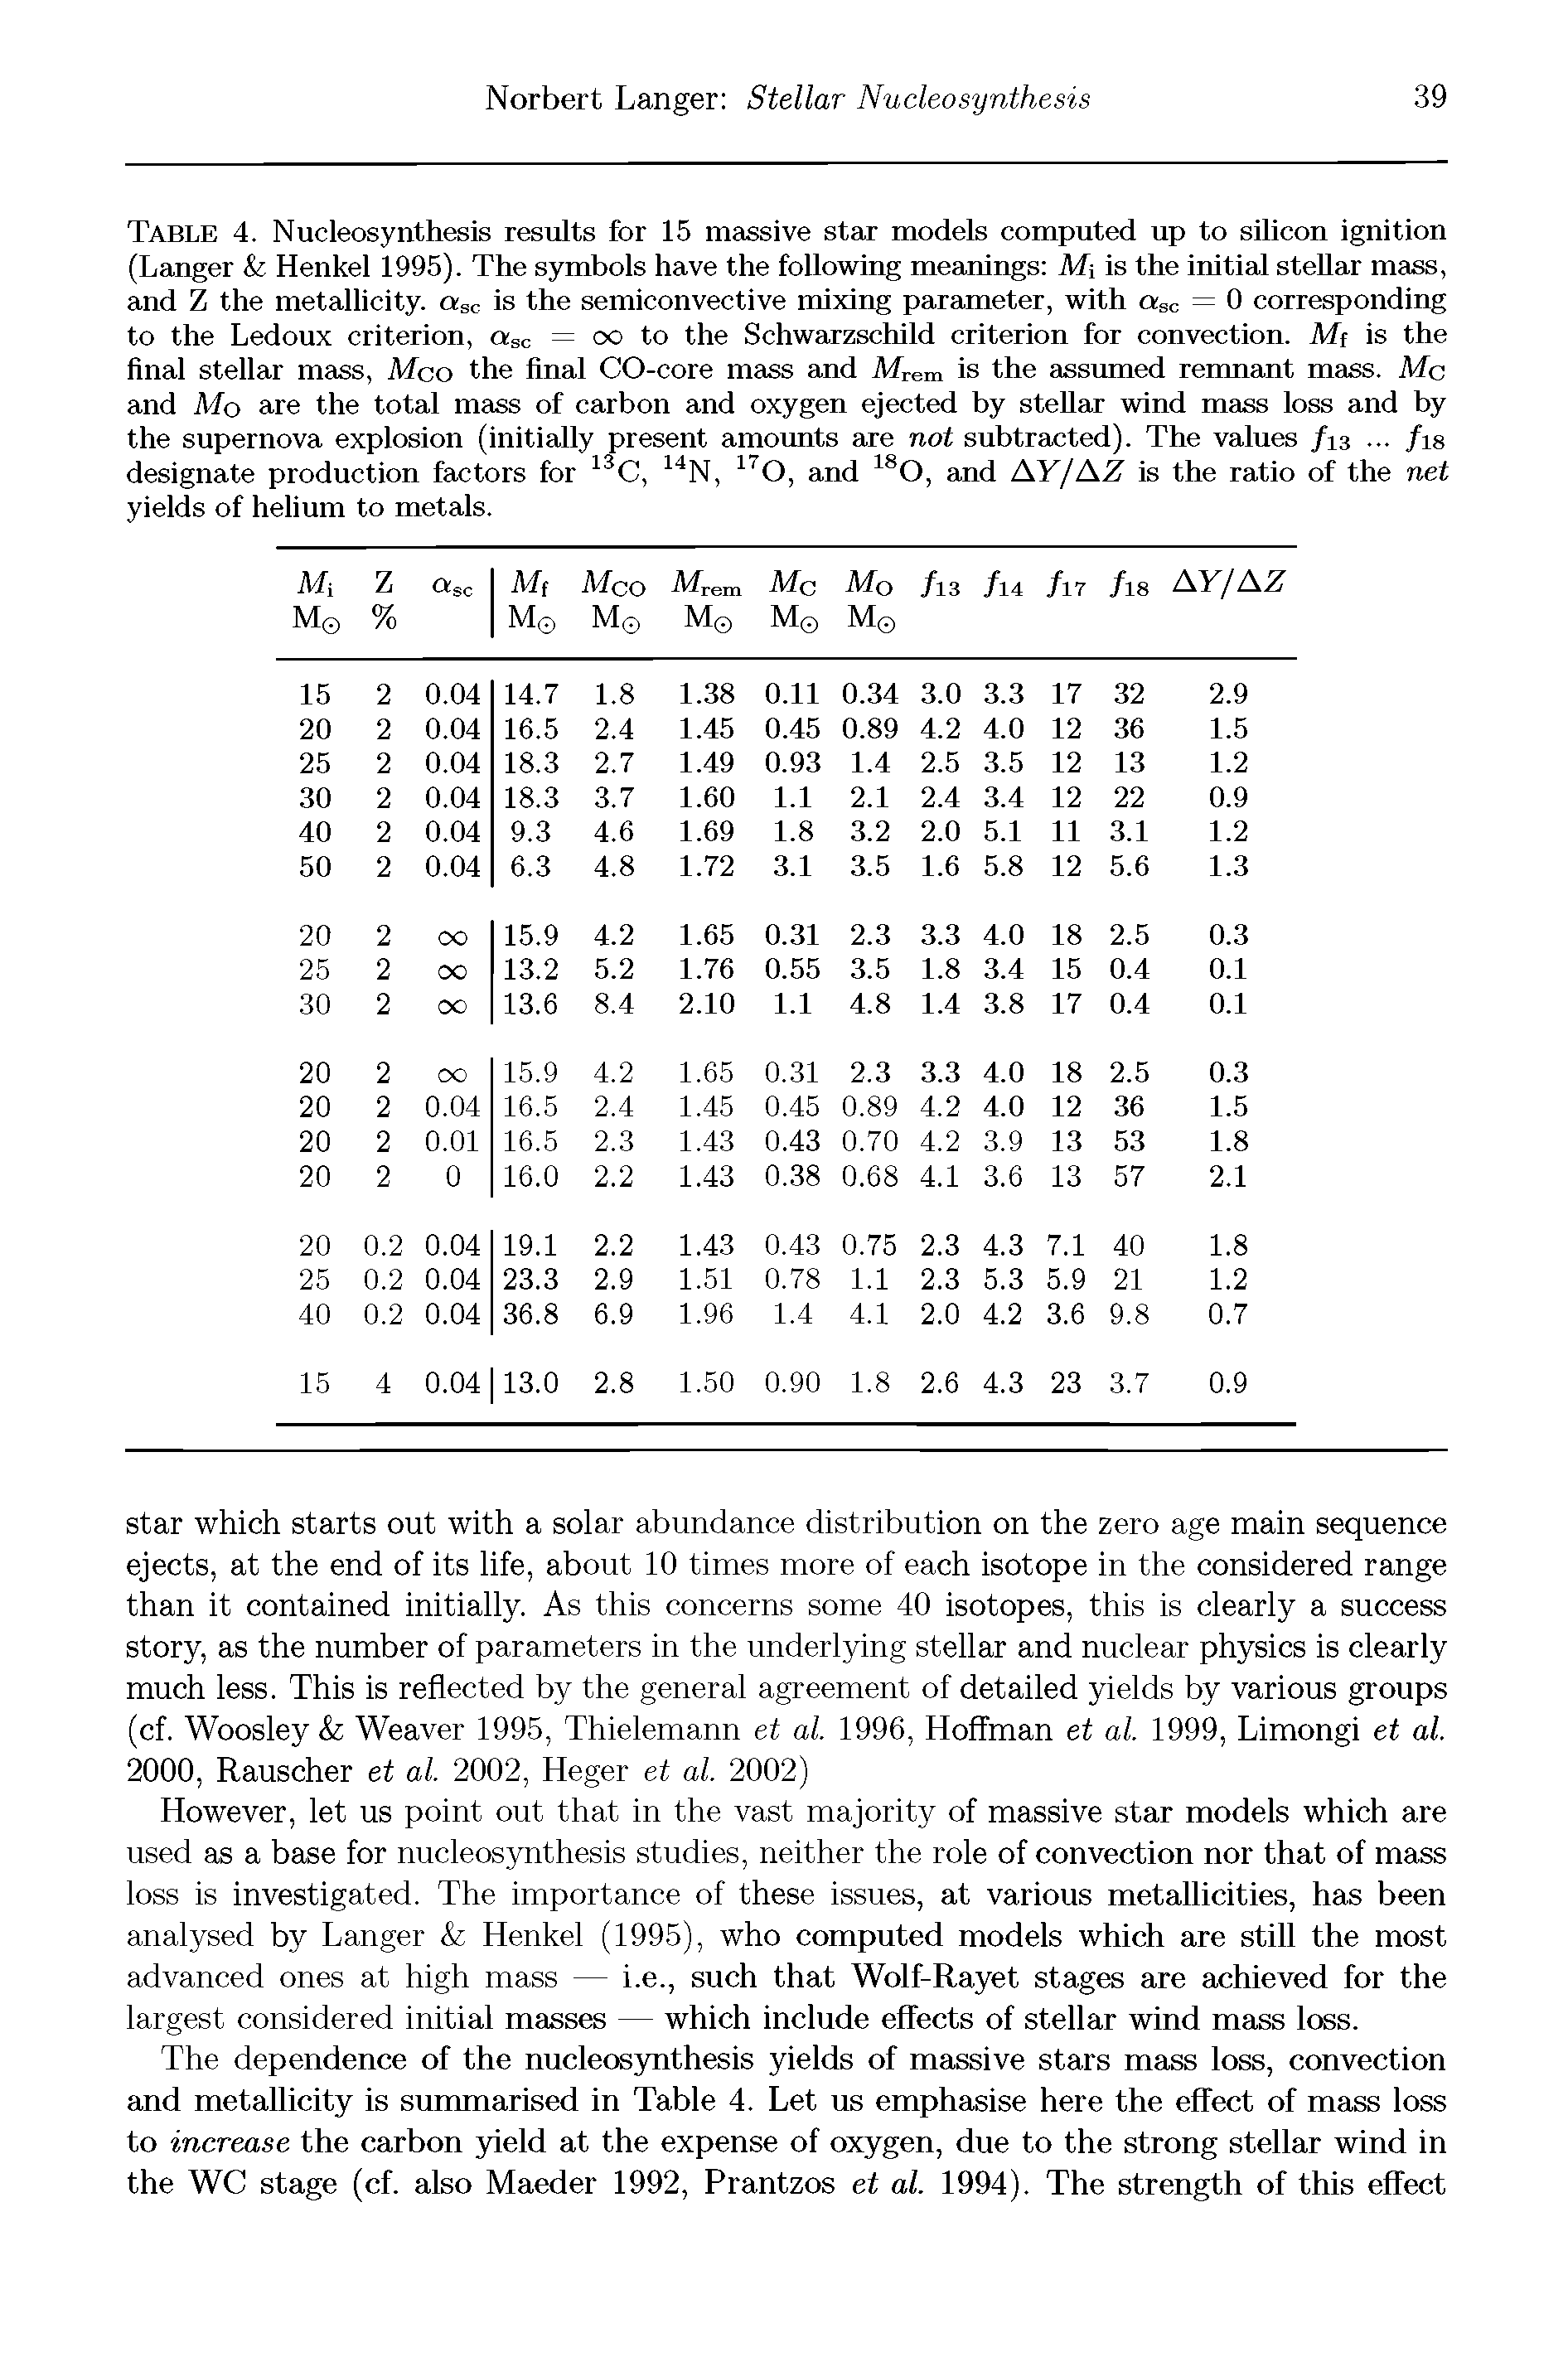 Table 4. Nucleosynthesis results for 15 massive star models computed up to silicon ignition (Langer Henkel 1995). The symbols have the following meanings Mi is the initial stellar mass, and Z the metallicity. asc is the semiconvective mixing parameter, with asc = 0 corresponding to the Ledoux criterion, asc = oo to the Schwarzschild criterion for convection. Mf is the final stellar mass, Mco the final CO-core mass and Mrem is the assumed remnant mass. Me and Mo are the total mass of carbon and oxygen ejected by stellar wind mass loss and by the supernova explosion (initially present amounts are not subtracted). The values /13. .. /is designate production factors for 13C, 14N, 170, and lsO, and AY/ AZ is the ratio of the net yields of helium to metals.